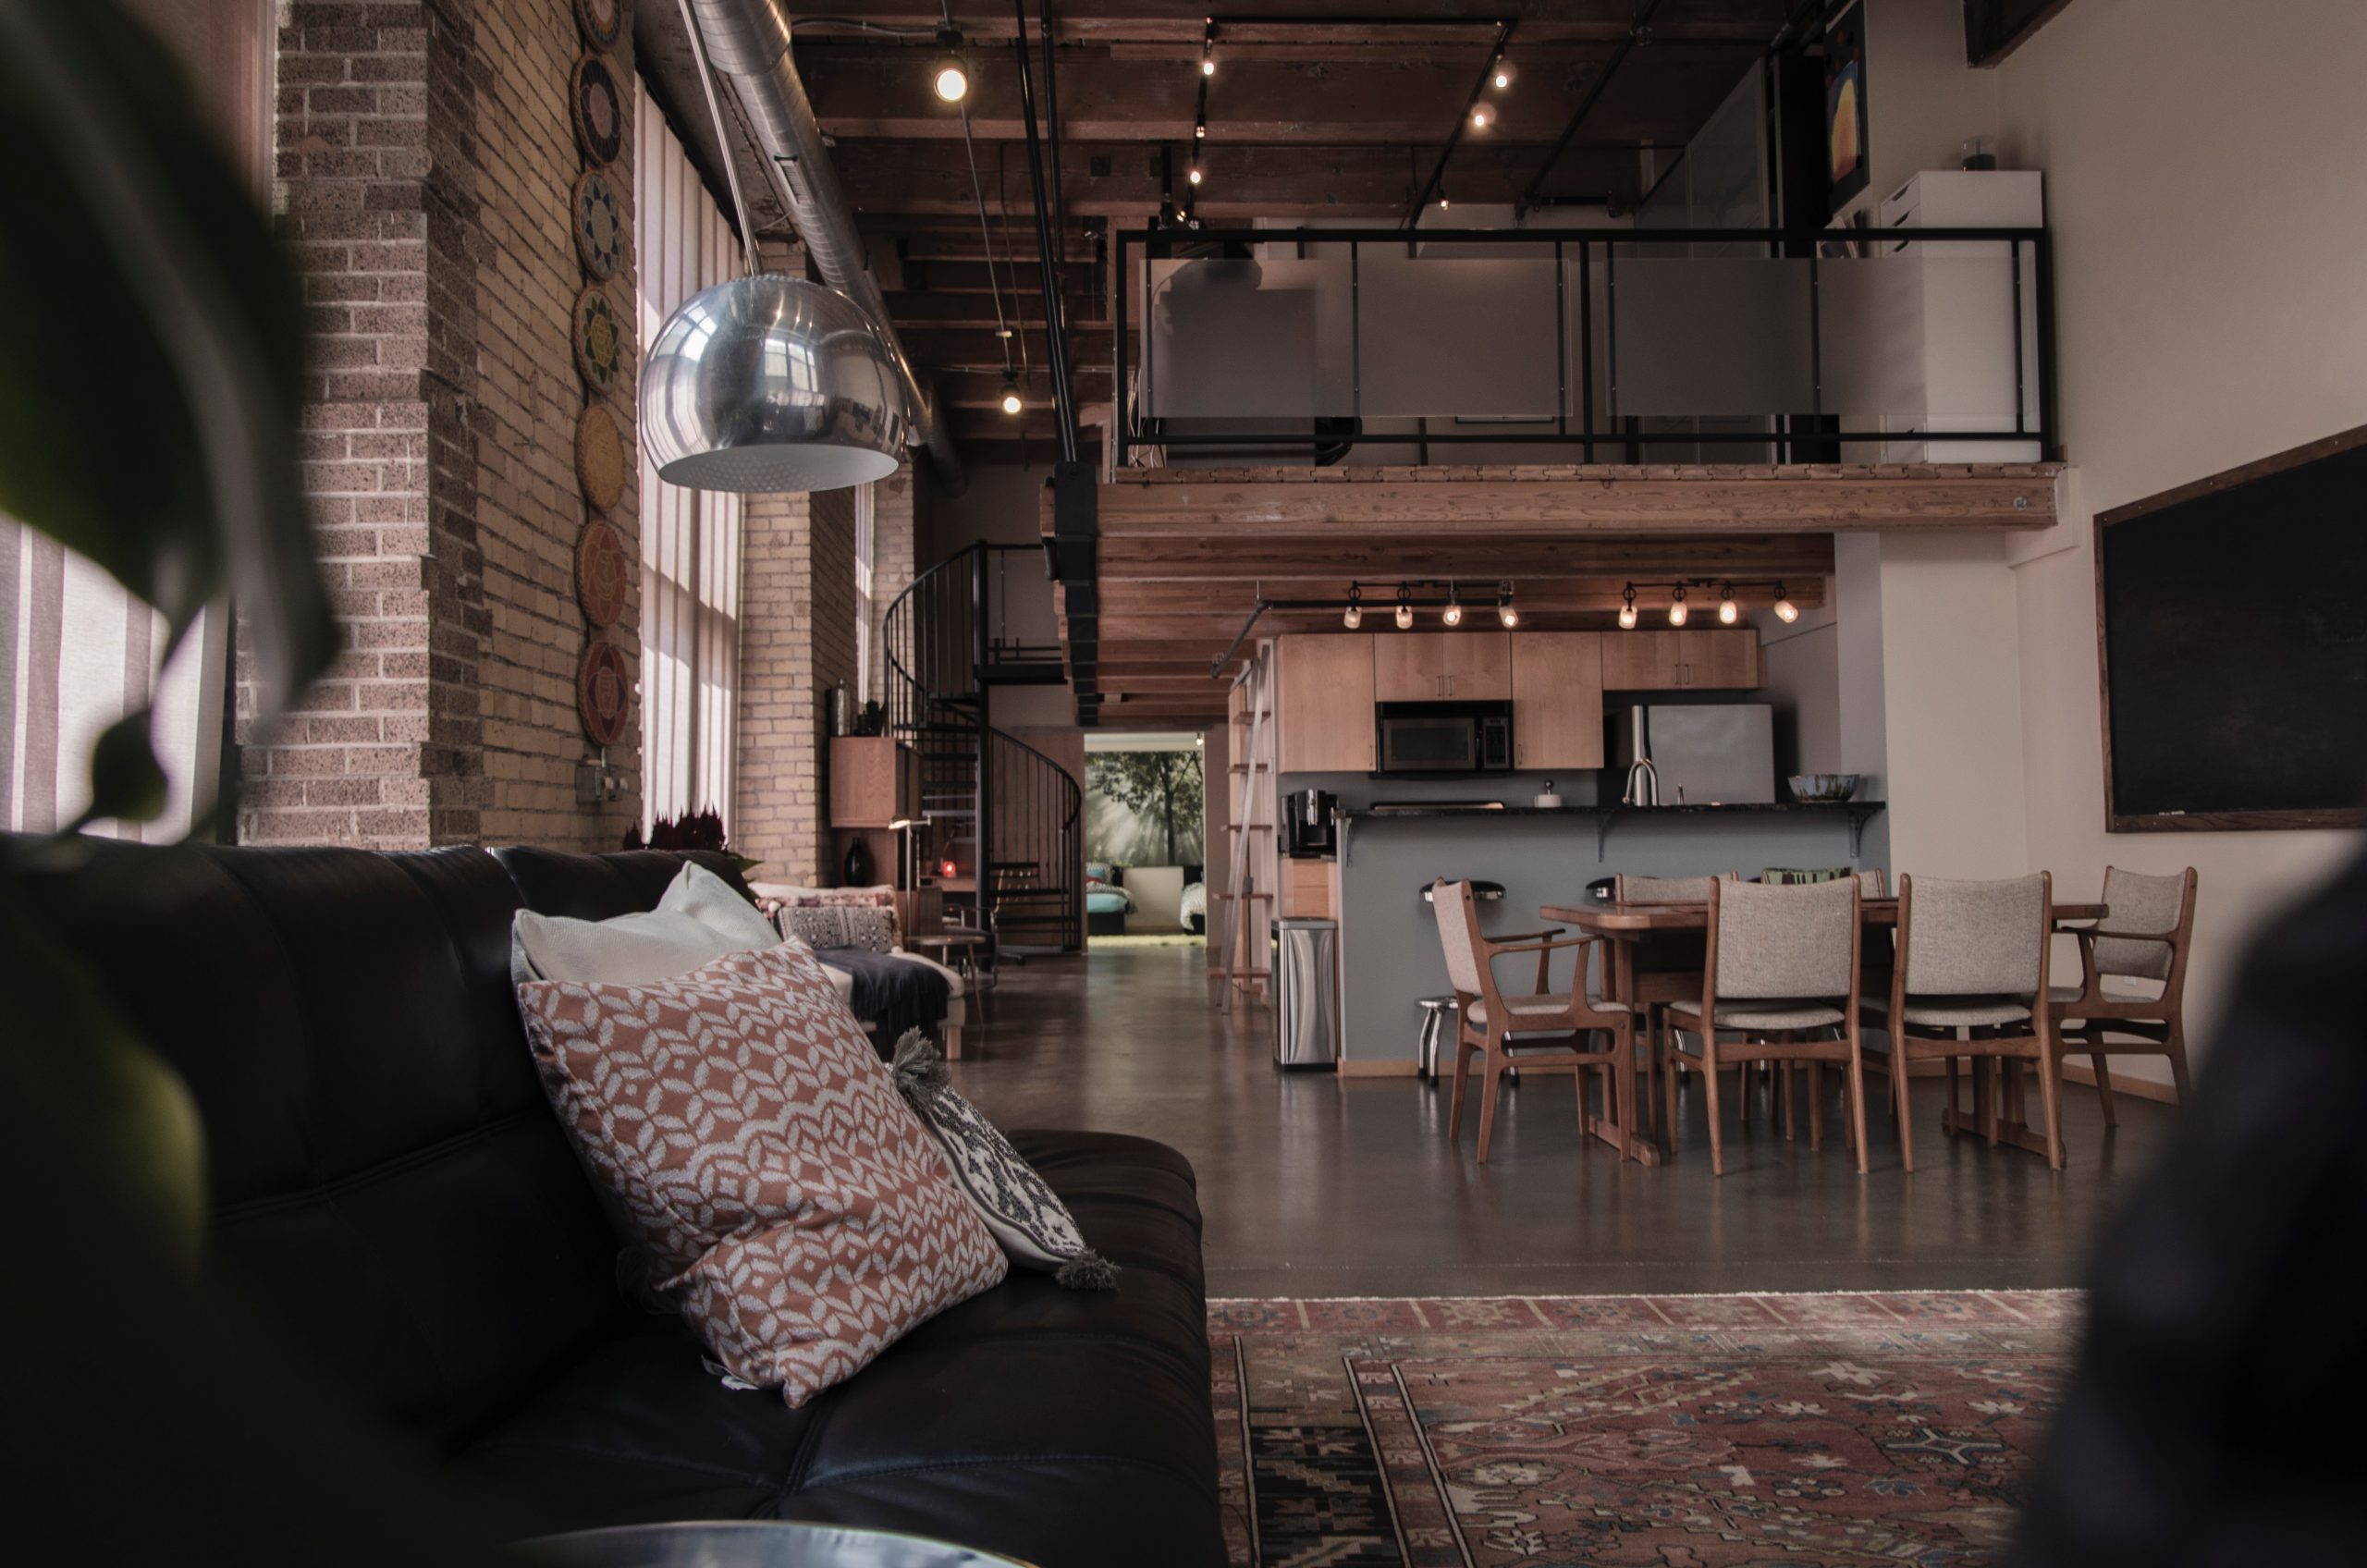 How to decorate the loft in a cozy way?